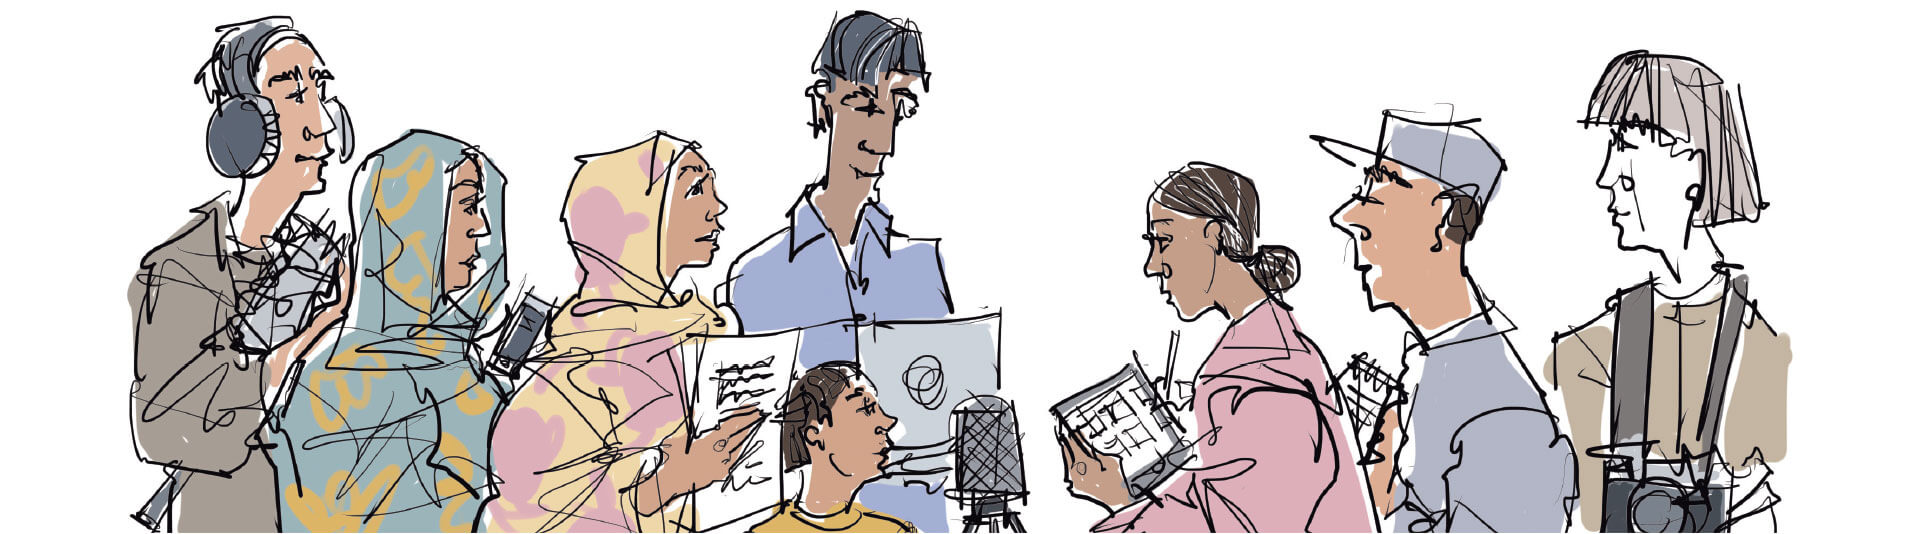 An illustration of two groups of people facing each other. The first group has five people among whom one using headphones, one holding some papers and one using a laptop, along with a child speaking into a microphone. The second group has three people among whom one using a tablet, one a notepad and the last a camera.